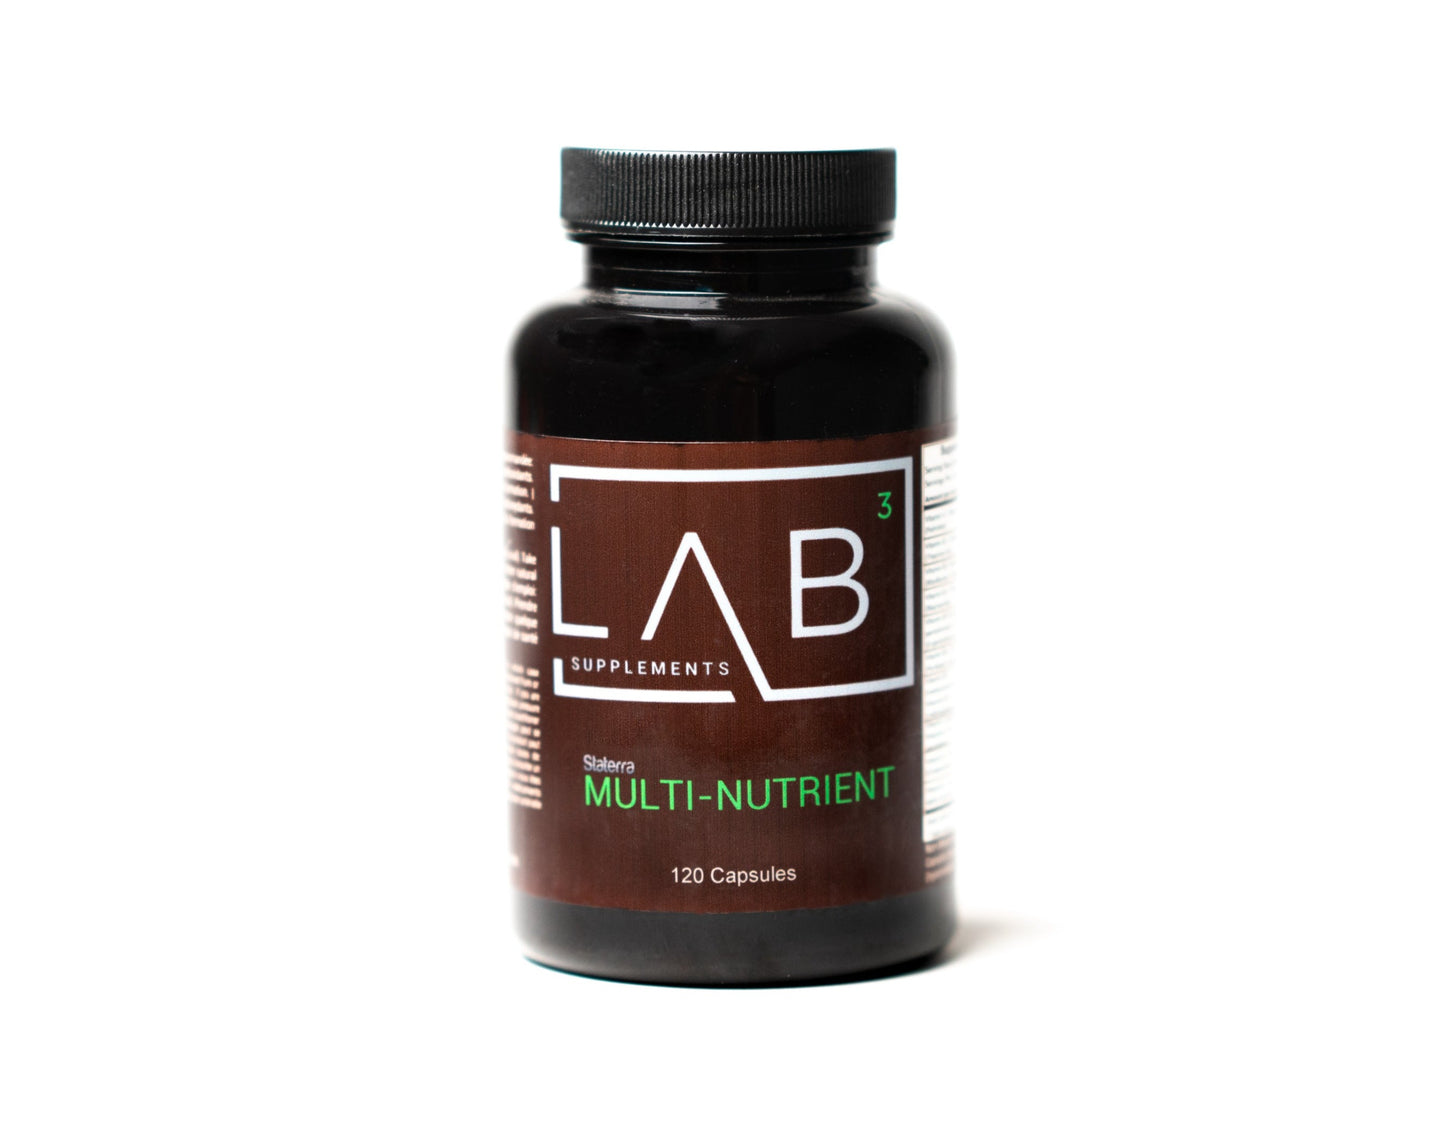 LAB Branded multi-nutrient supplement in small screw-top black bottle